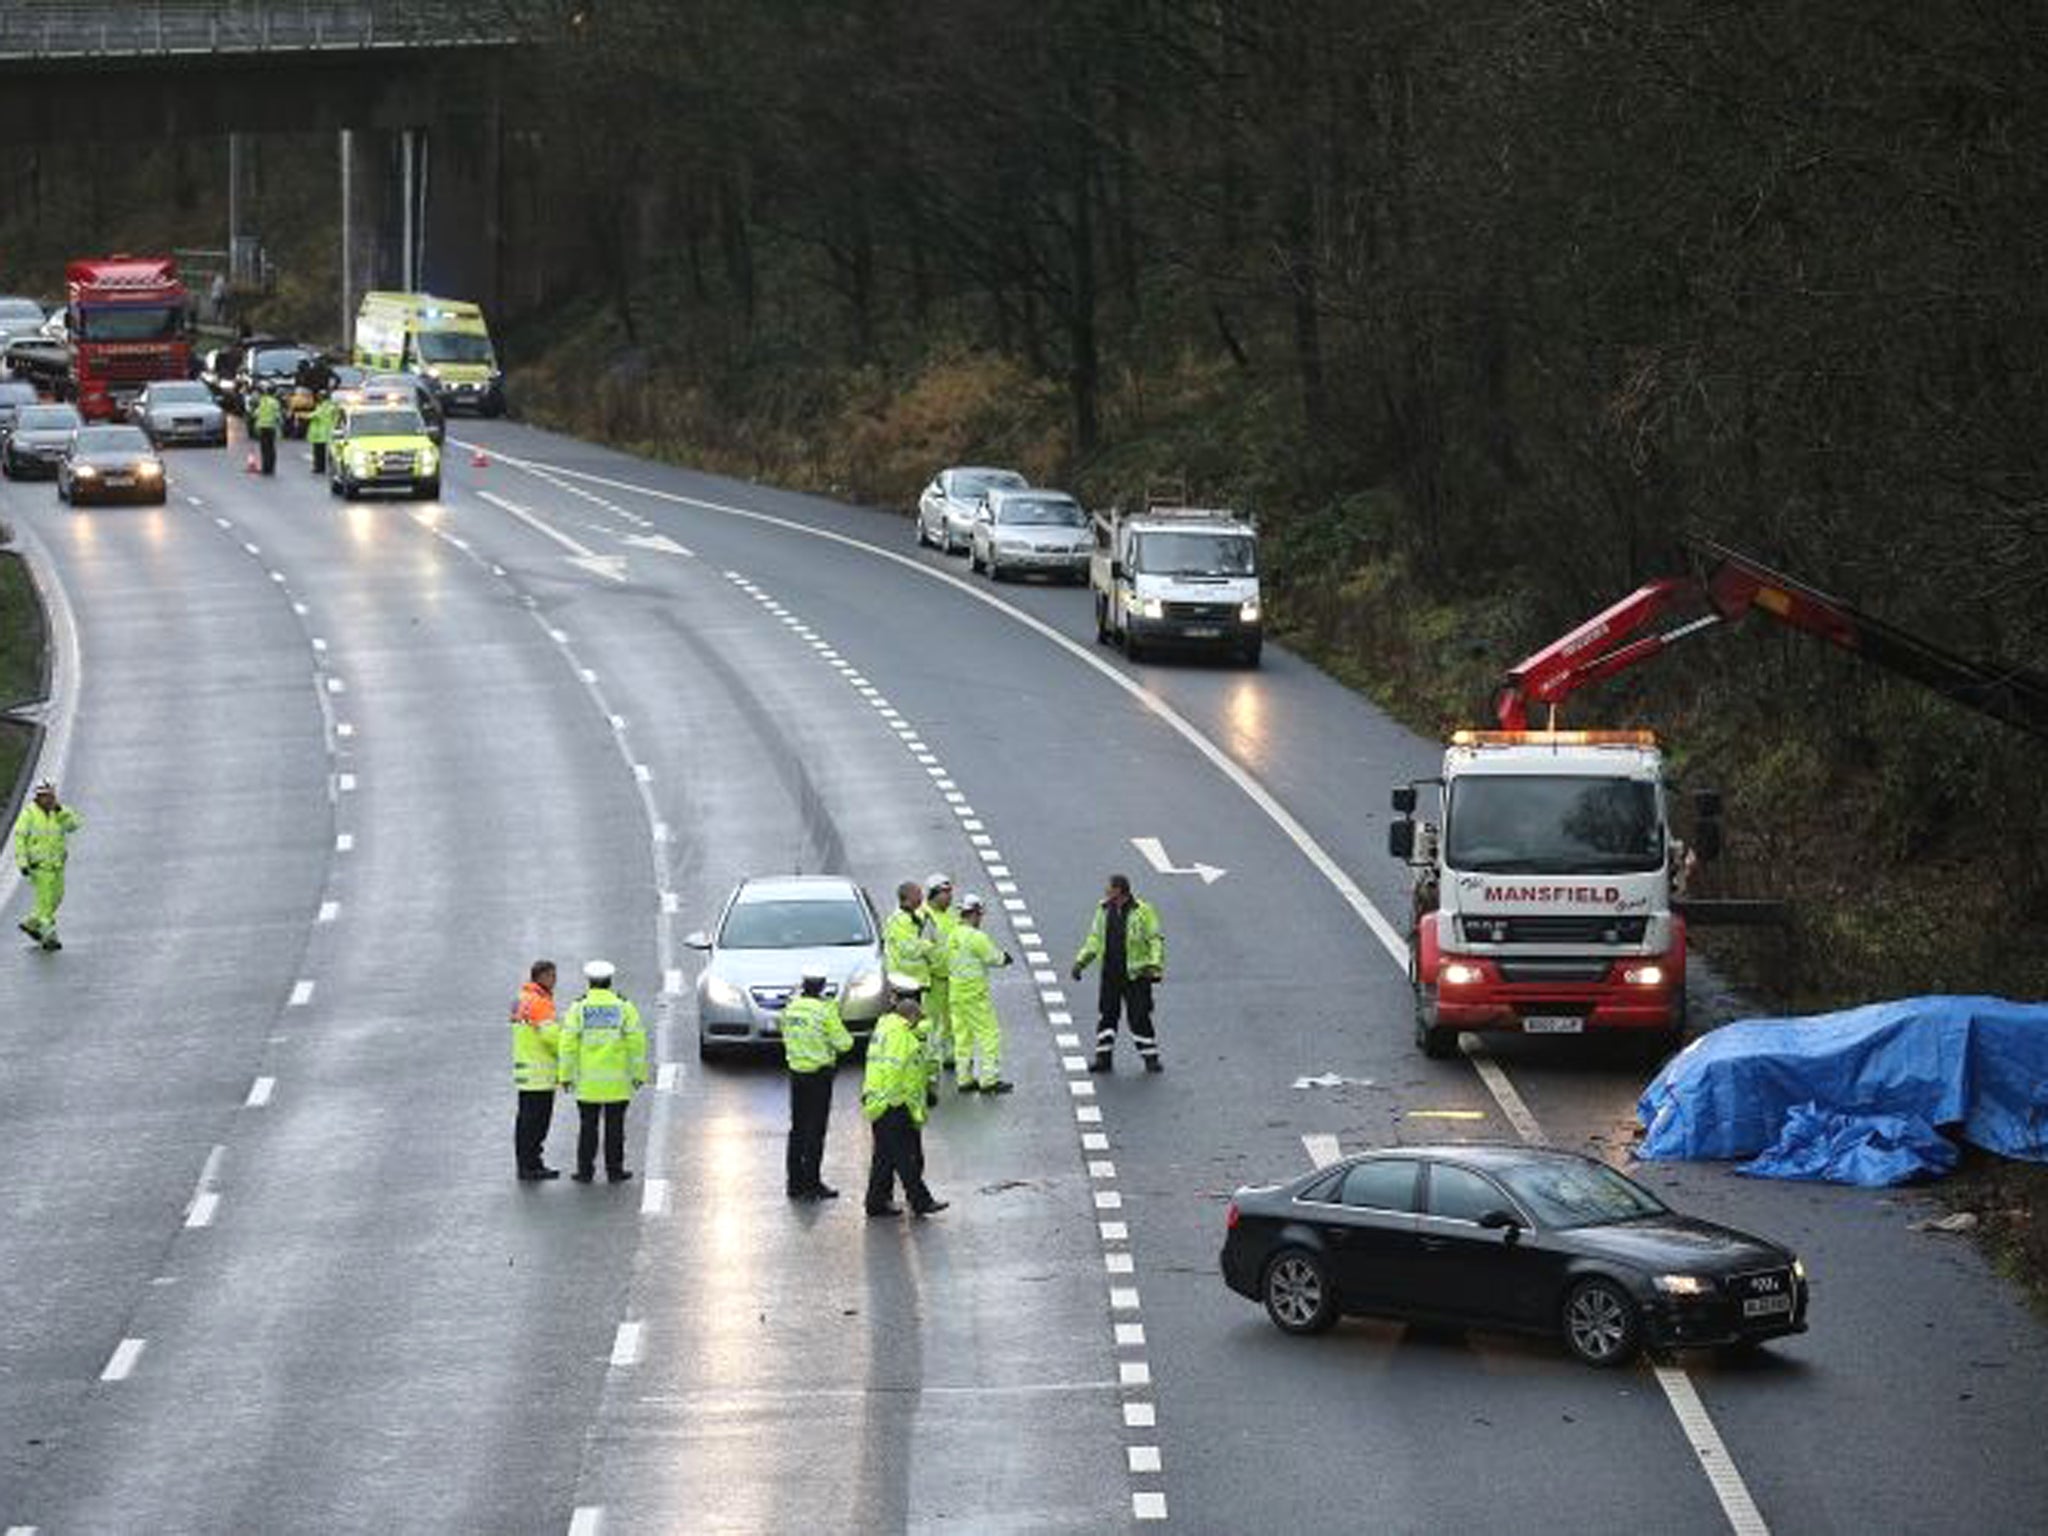 Police and emergency services attend the aftermath of a serious motor accident between Junctions 14 and 15 on the M6 motorway